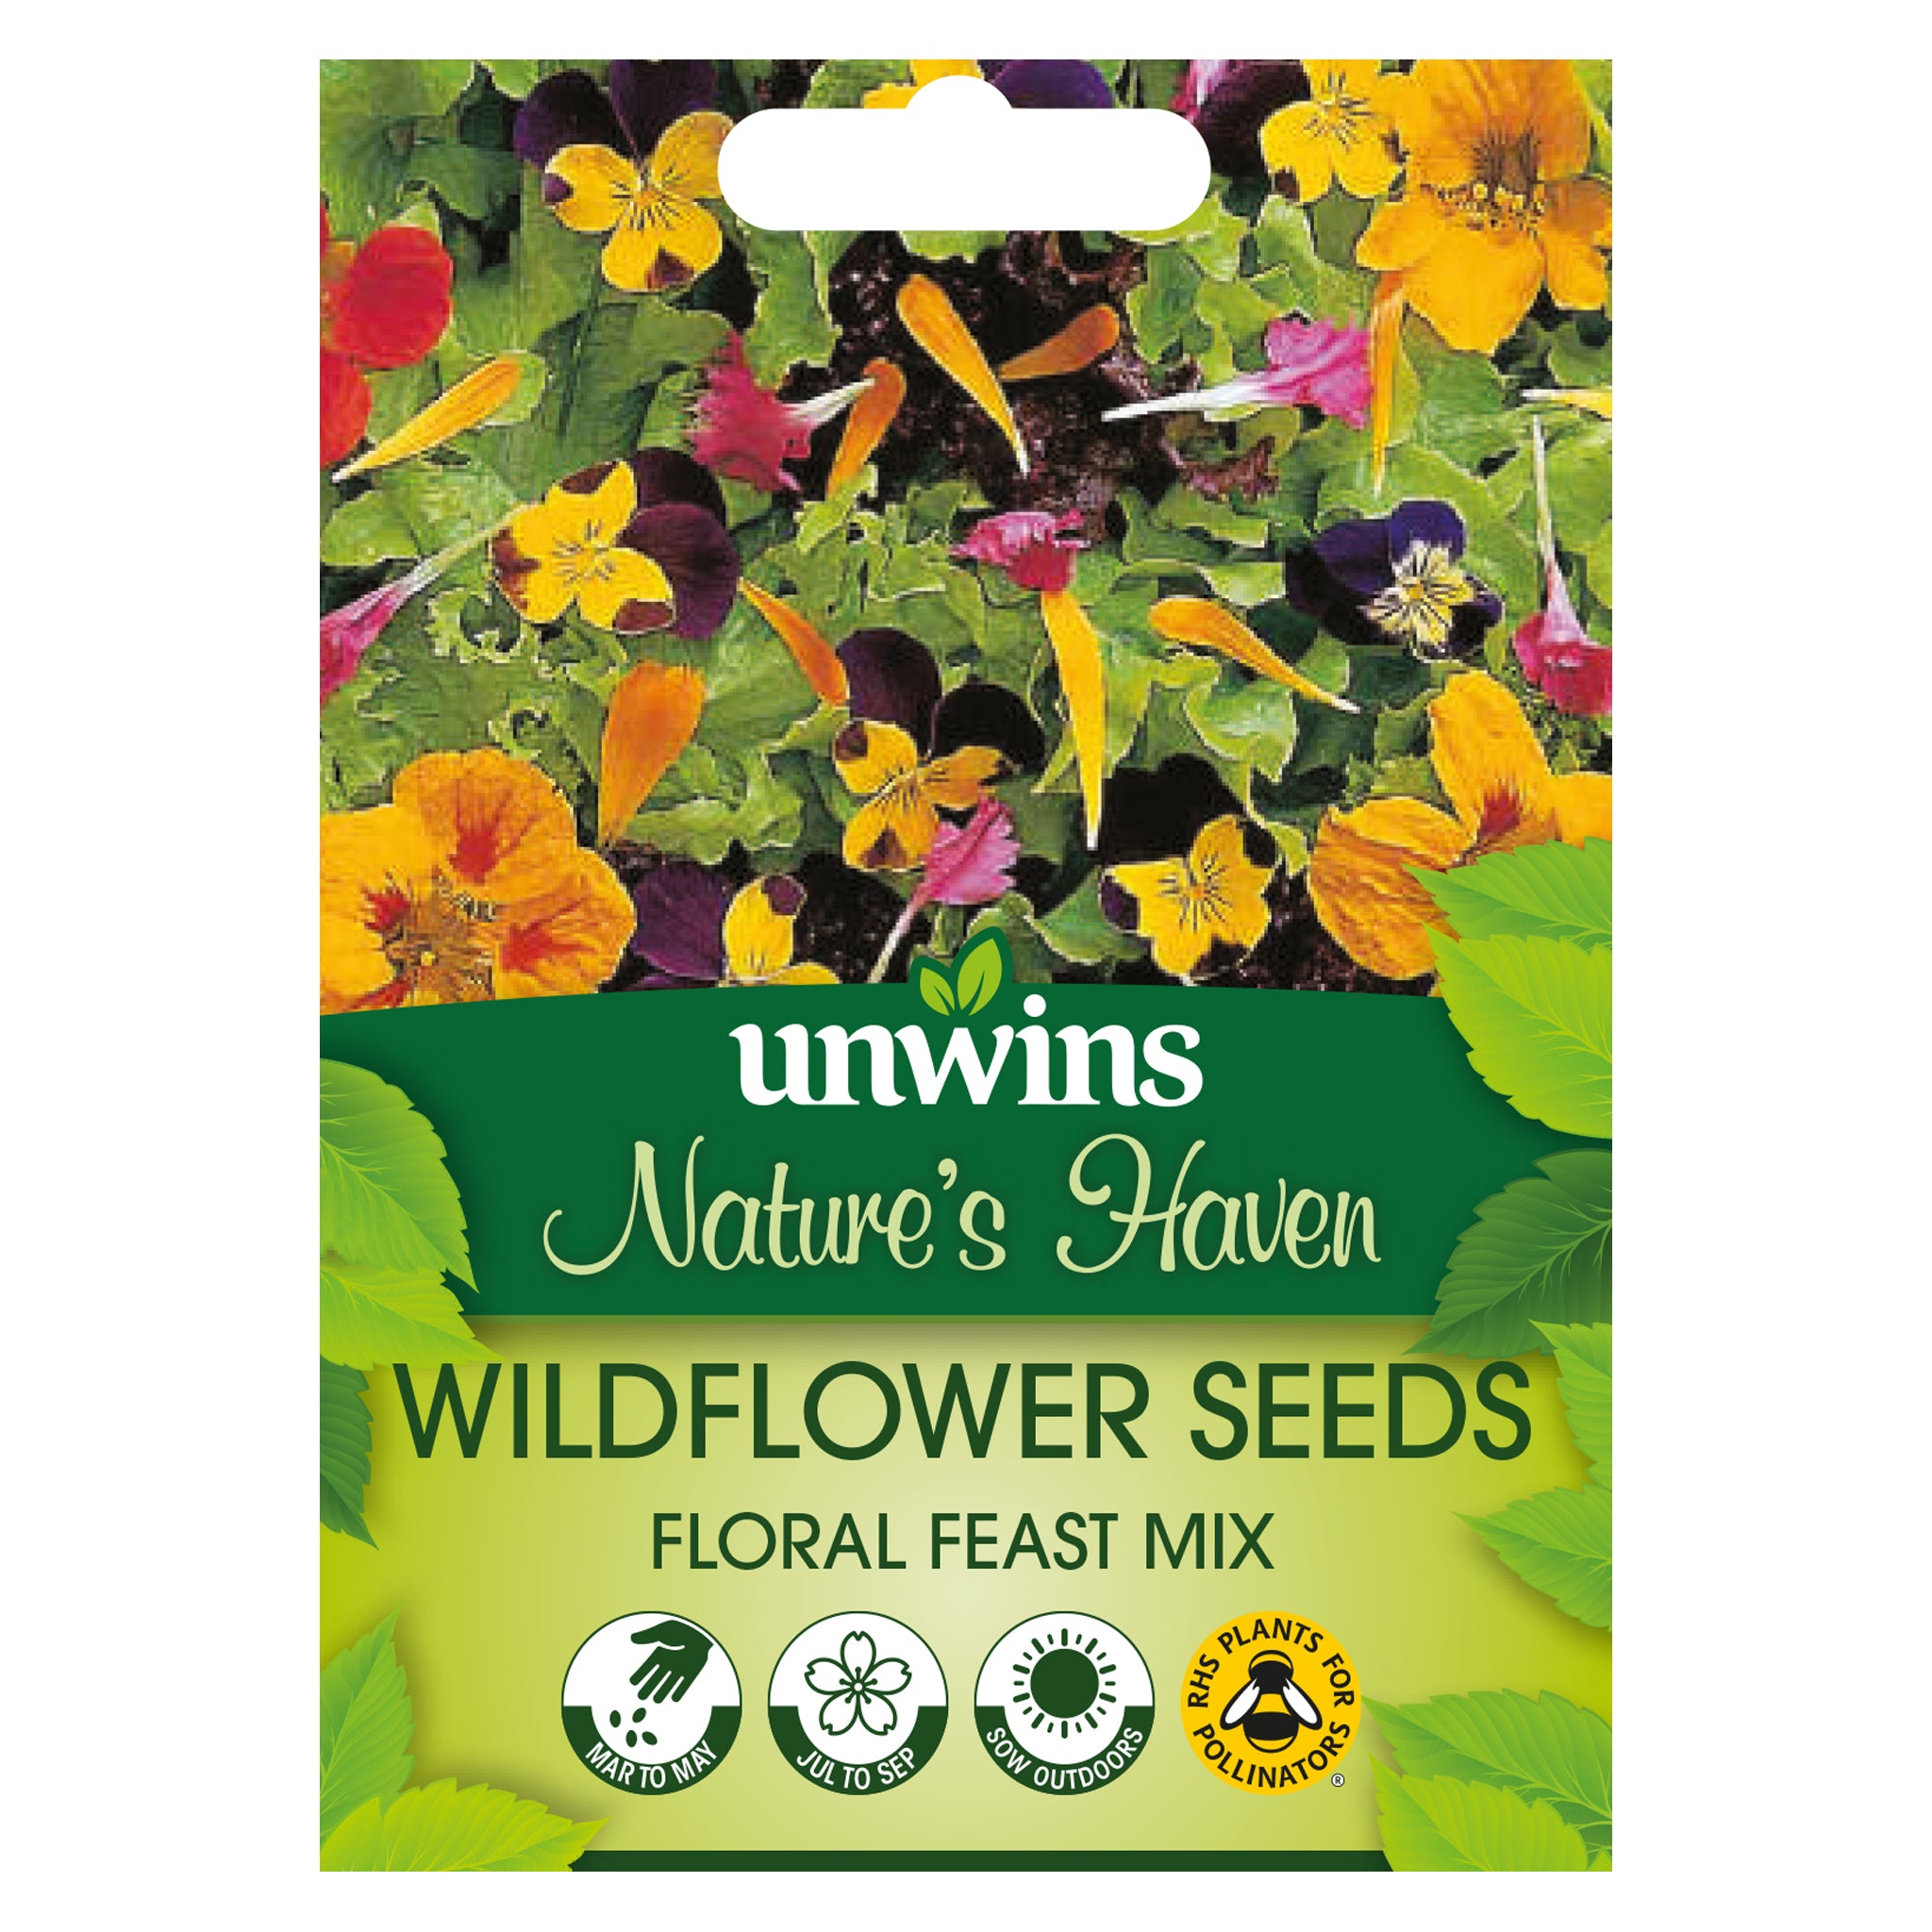 Nature's Haven Wildflower Seeds Floral Feast Mix Seeds